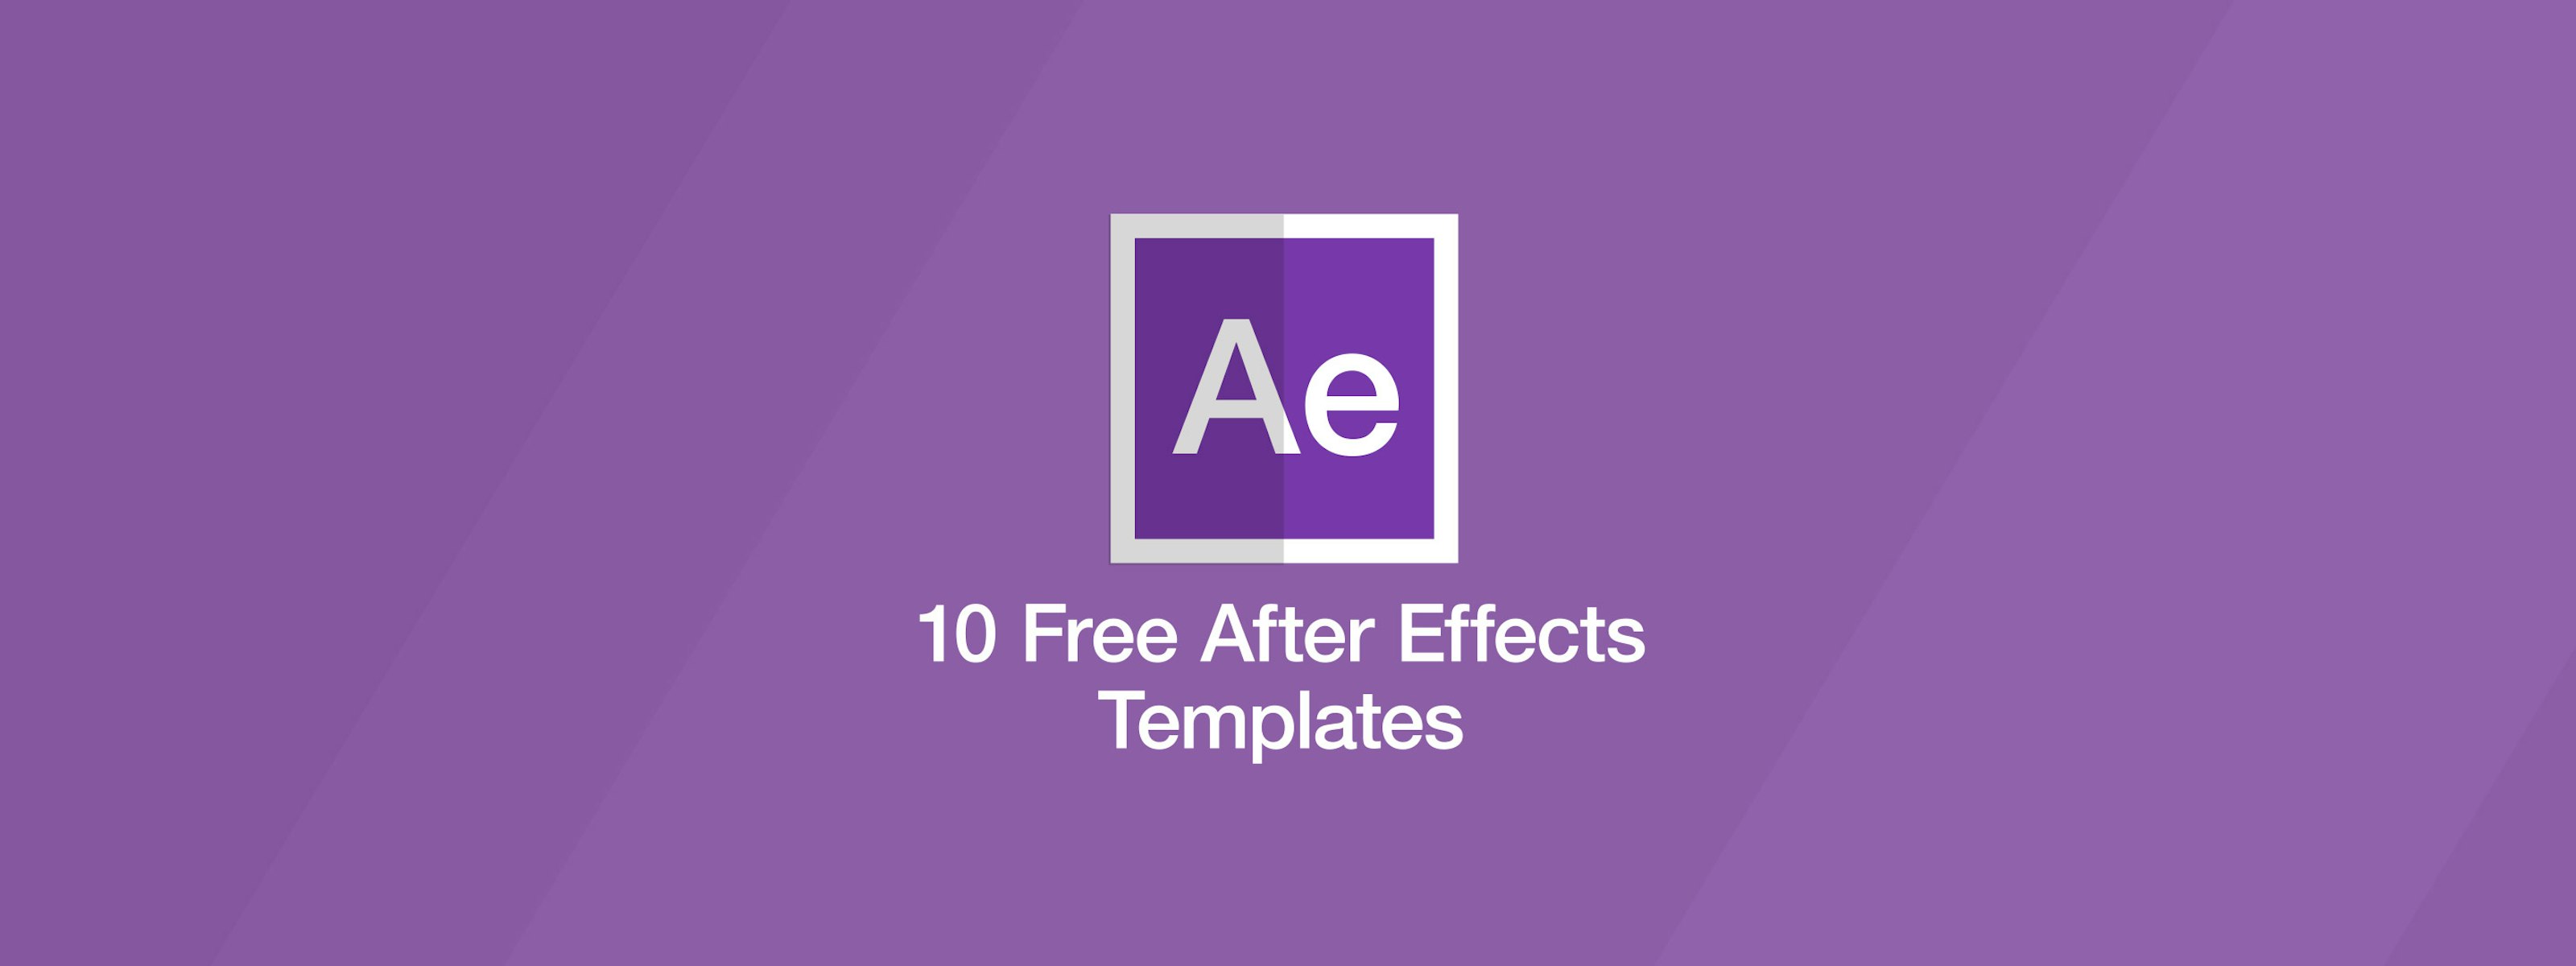 After effects templates free download title